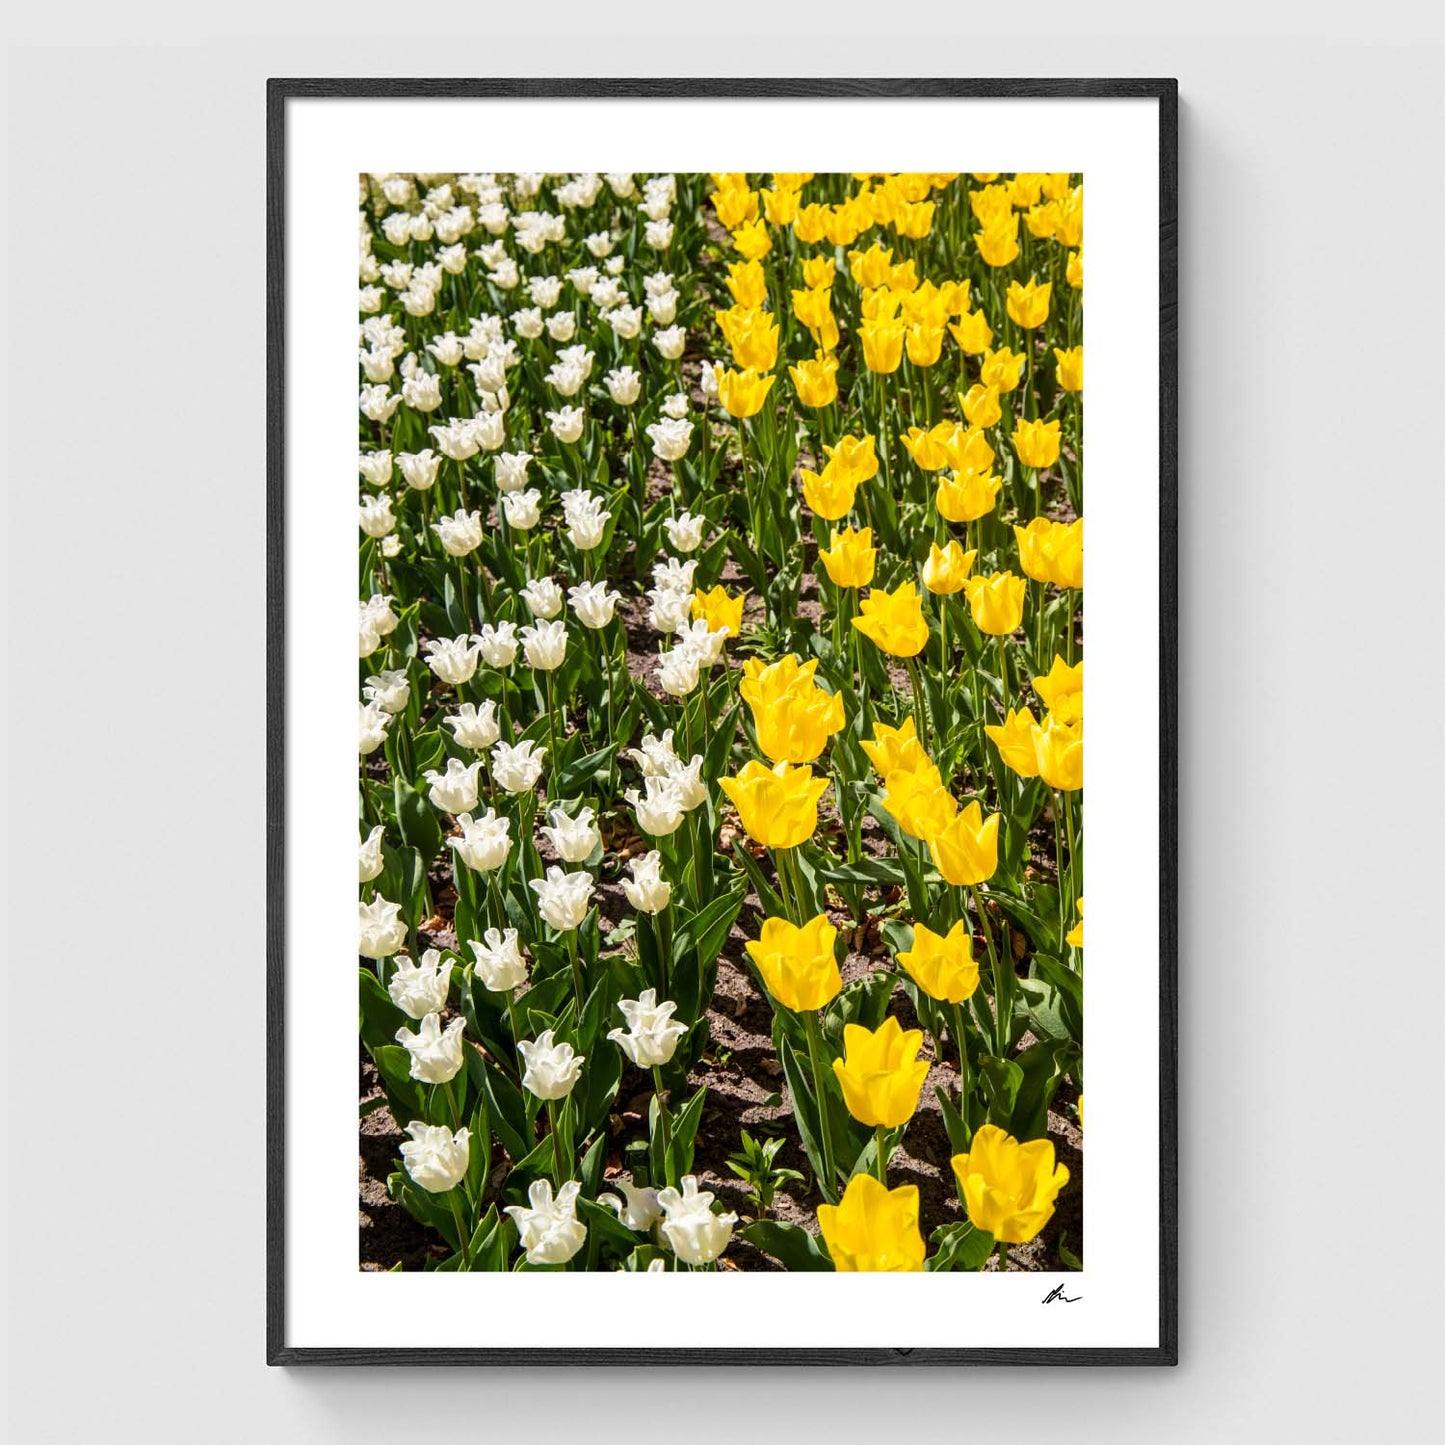 White and yellow tulips in field